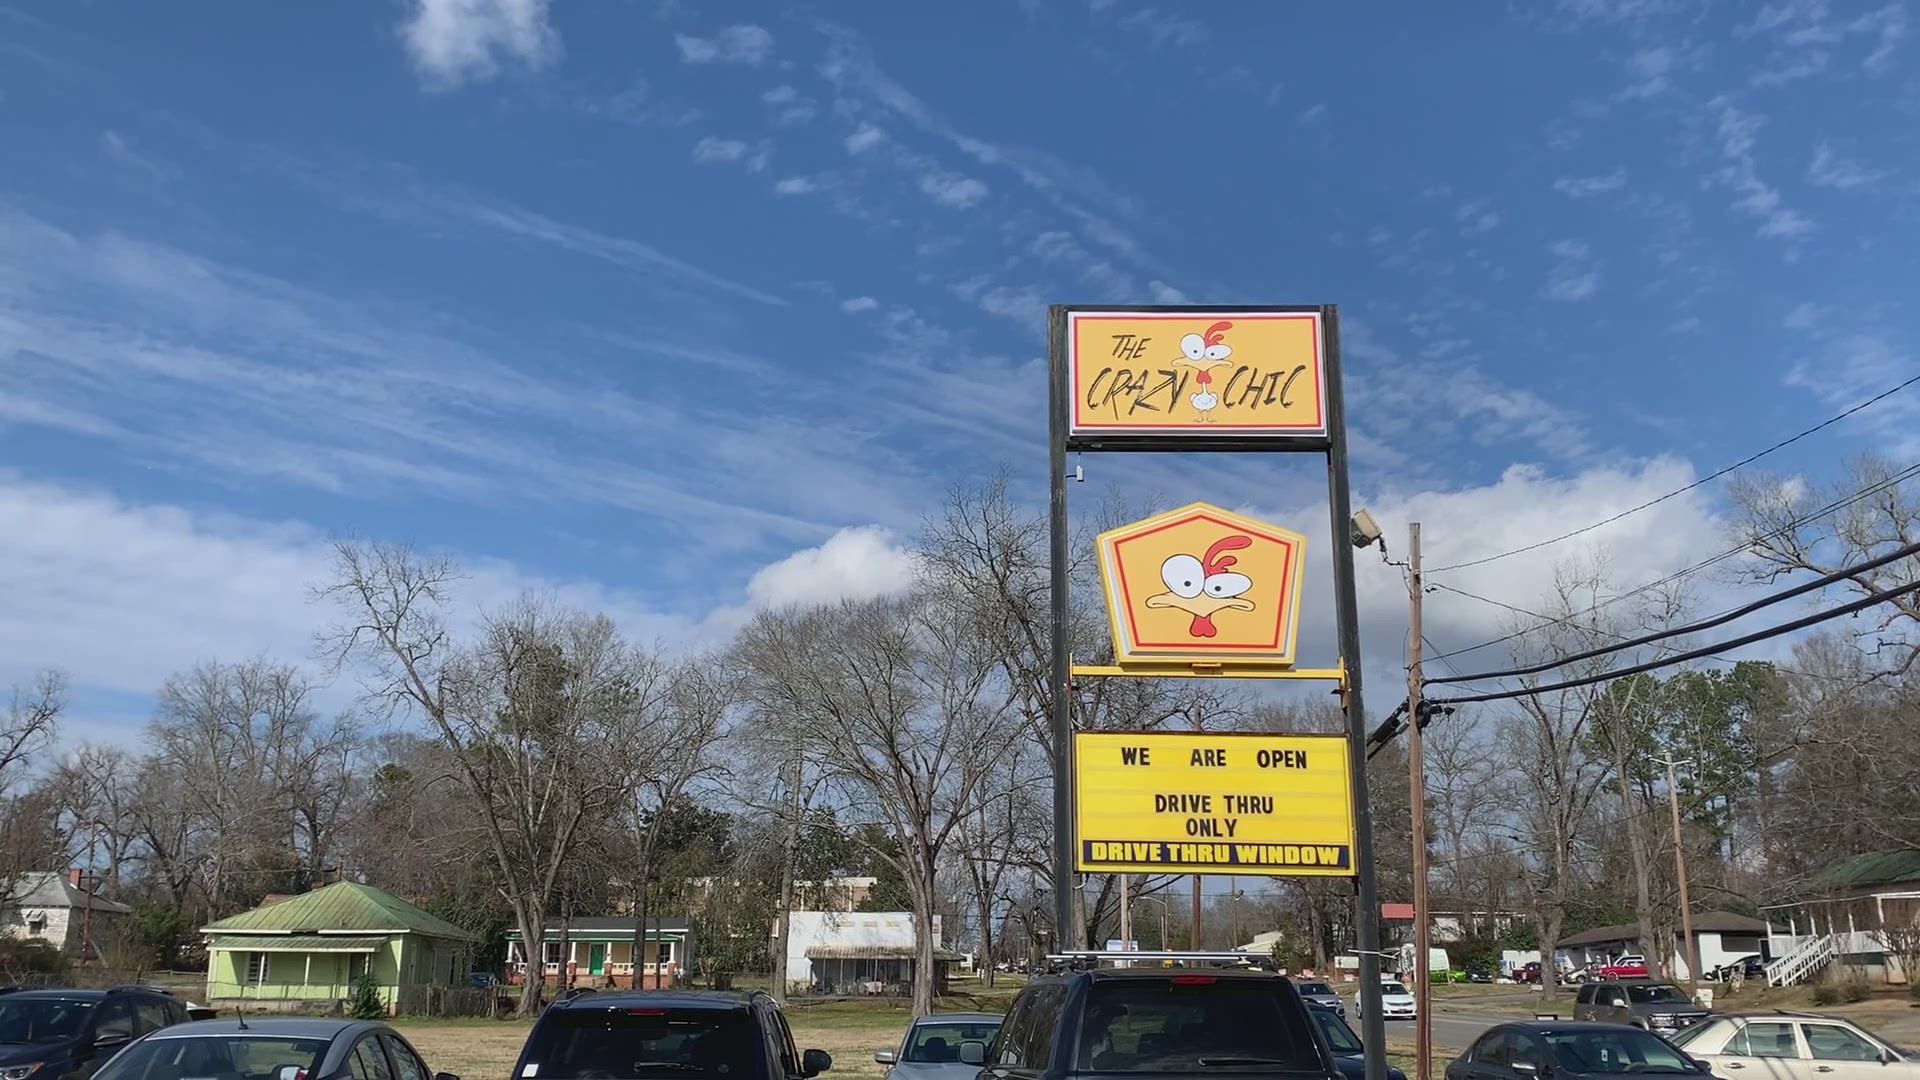 The new chicken spot occupies the former Dairylane location in Milledgeville